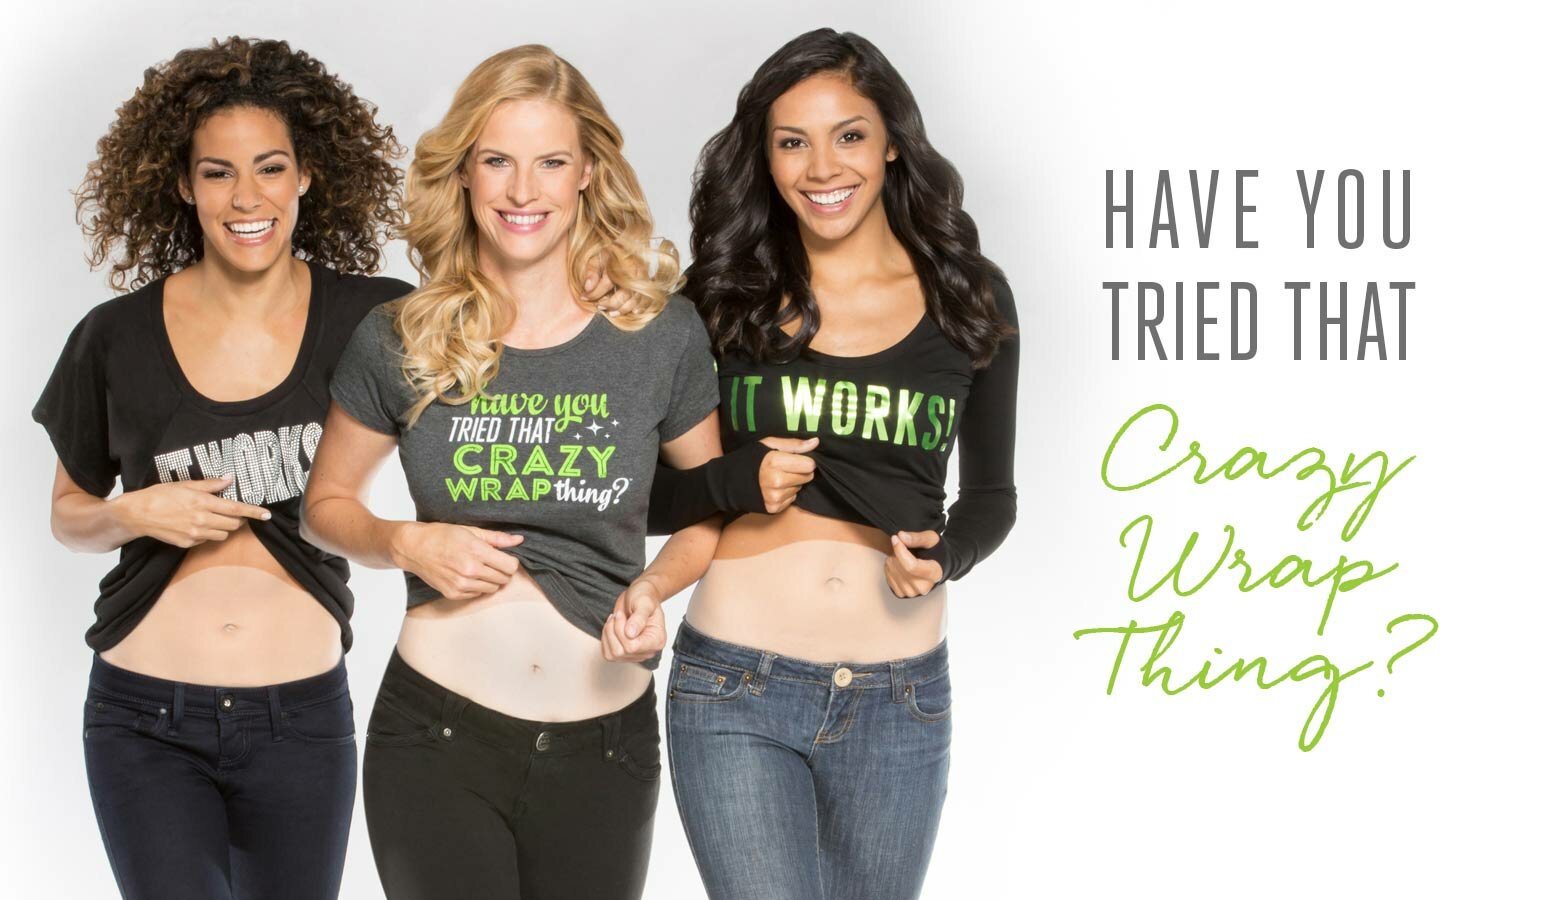 It works banner for healthinista